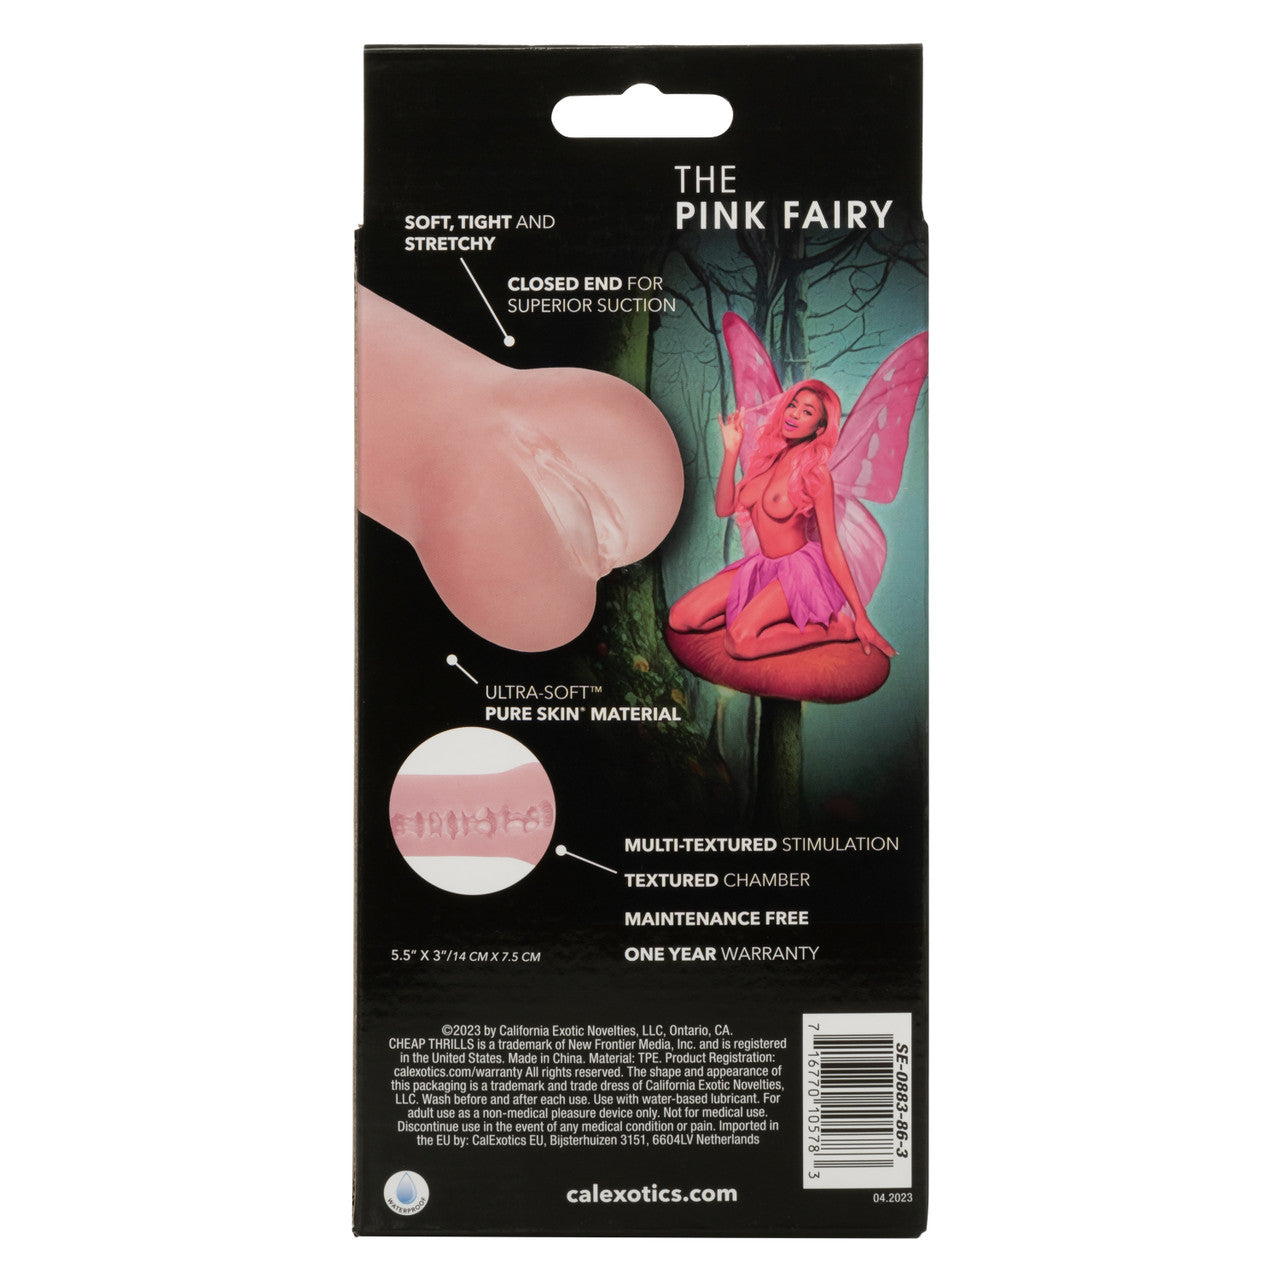 Cheap Thrills The Pink Fairy Stroker - Thorn & Feather